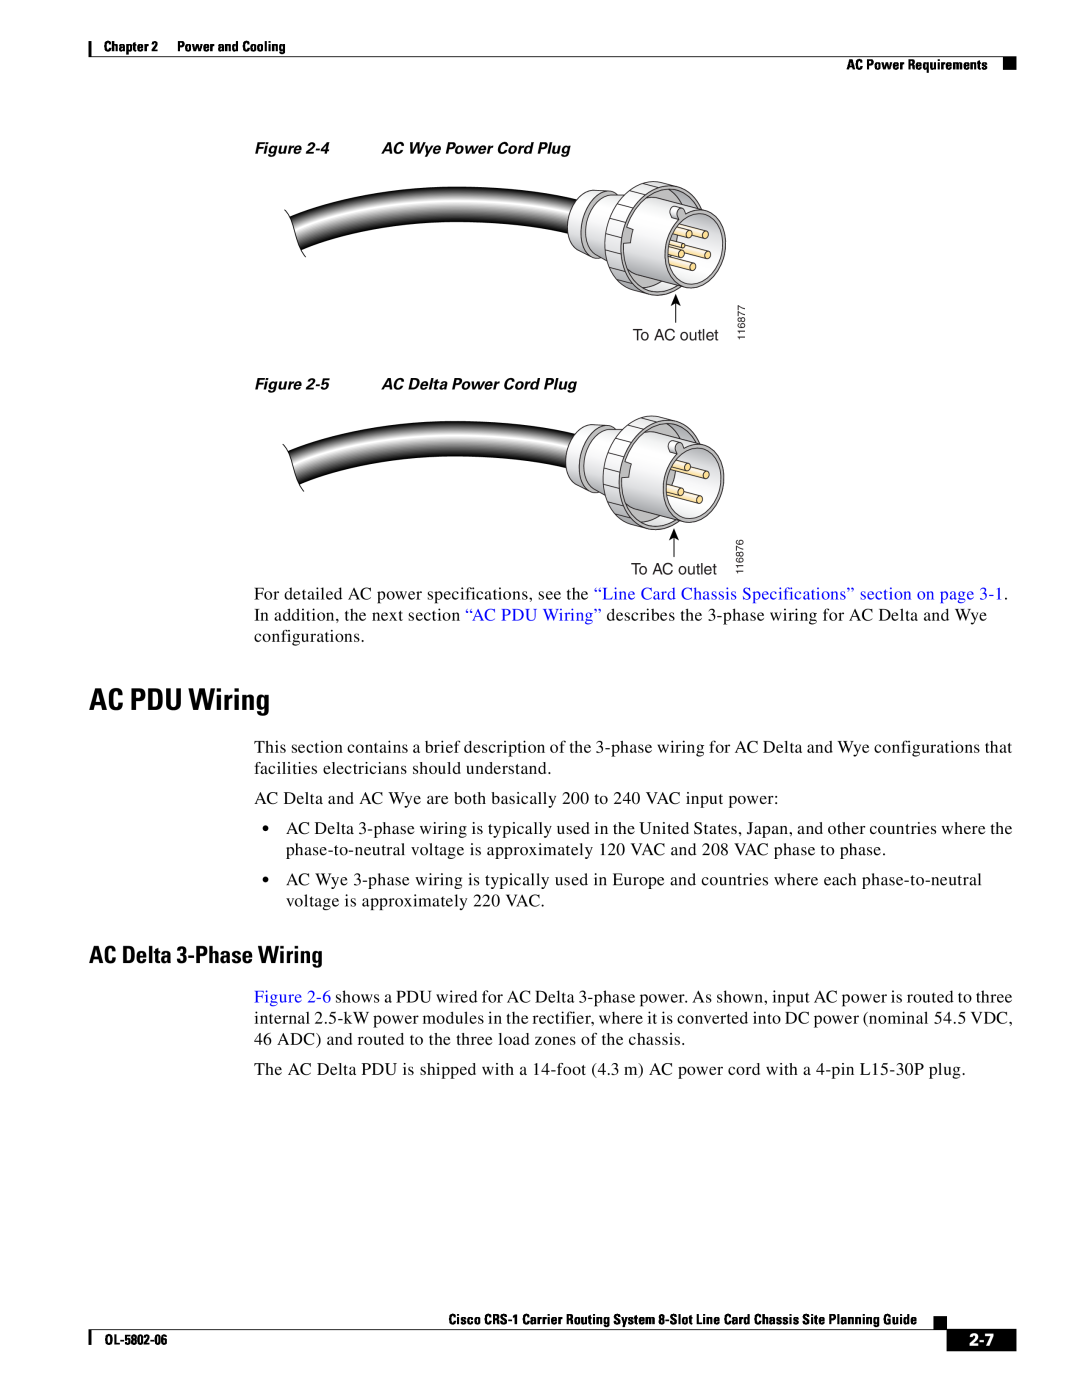 Cisco Systems CRS-1 manual AC PDU Wiring, AC Delta 3-Phase Wiring 